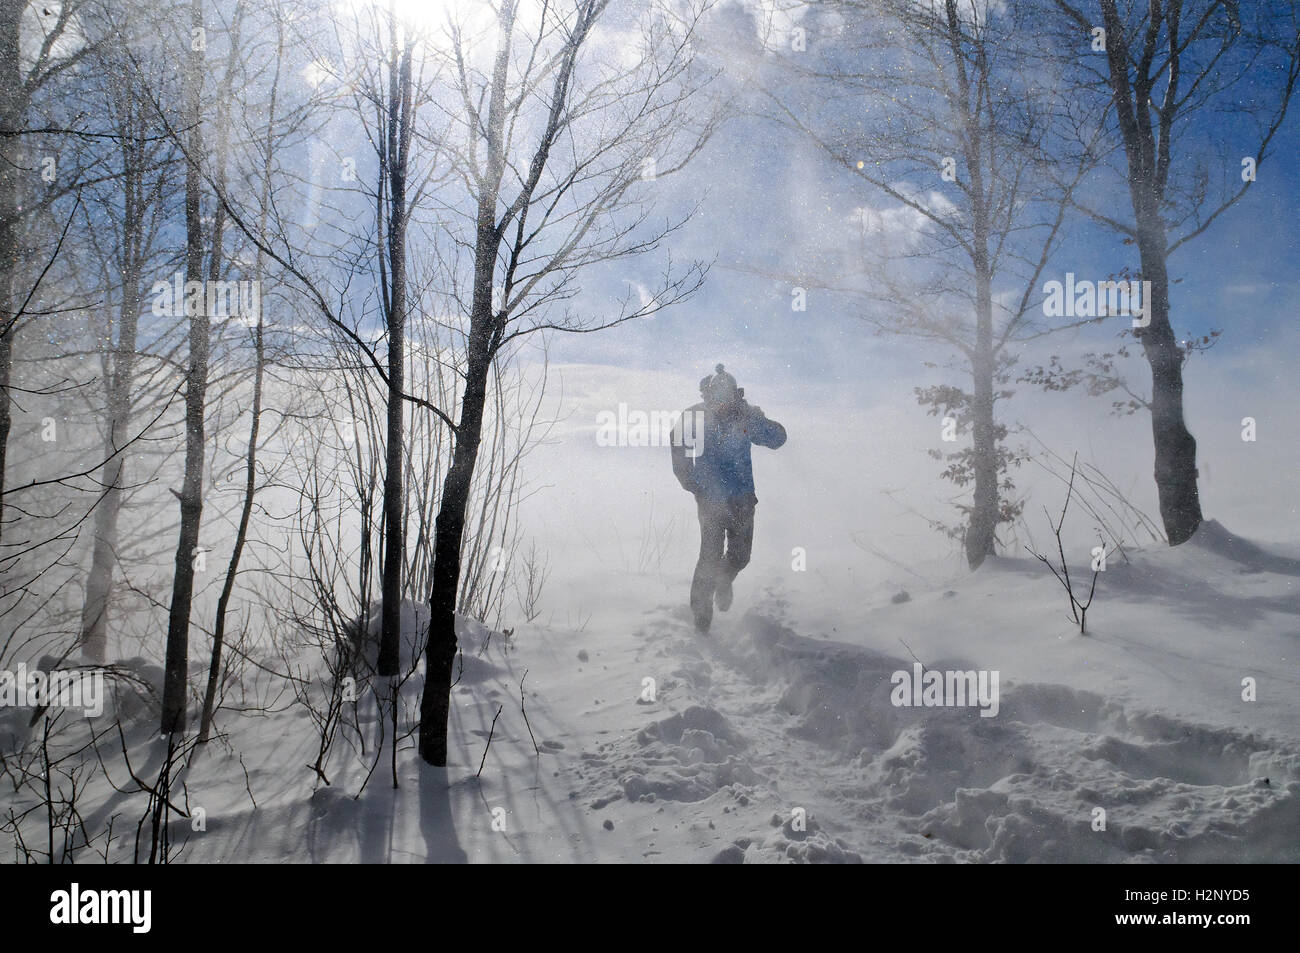 Person is breaking through blizzard. Stock Photo